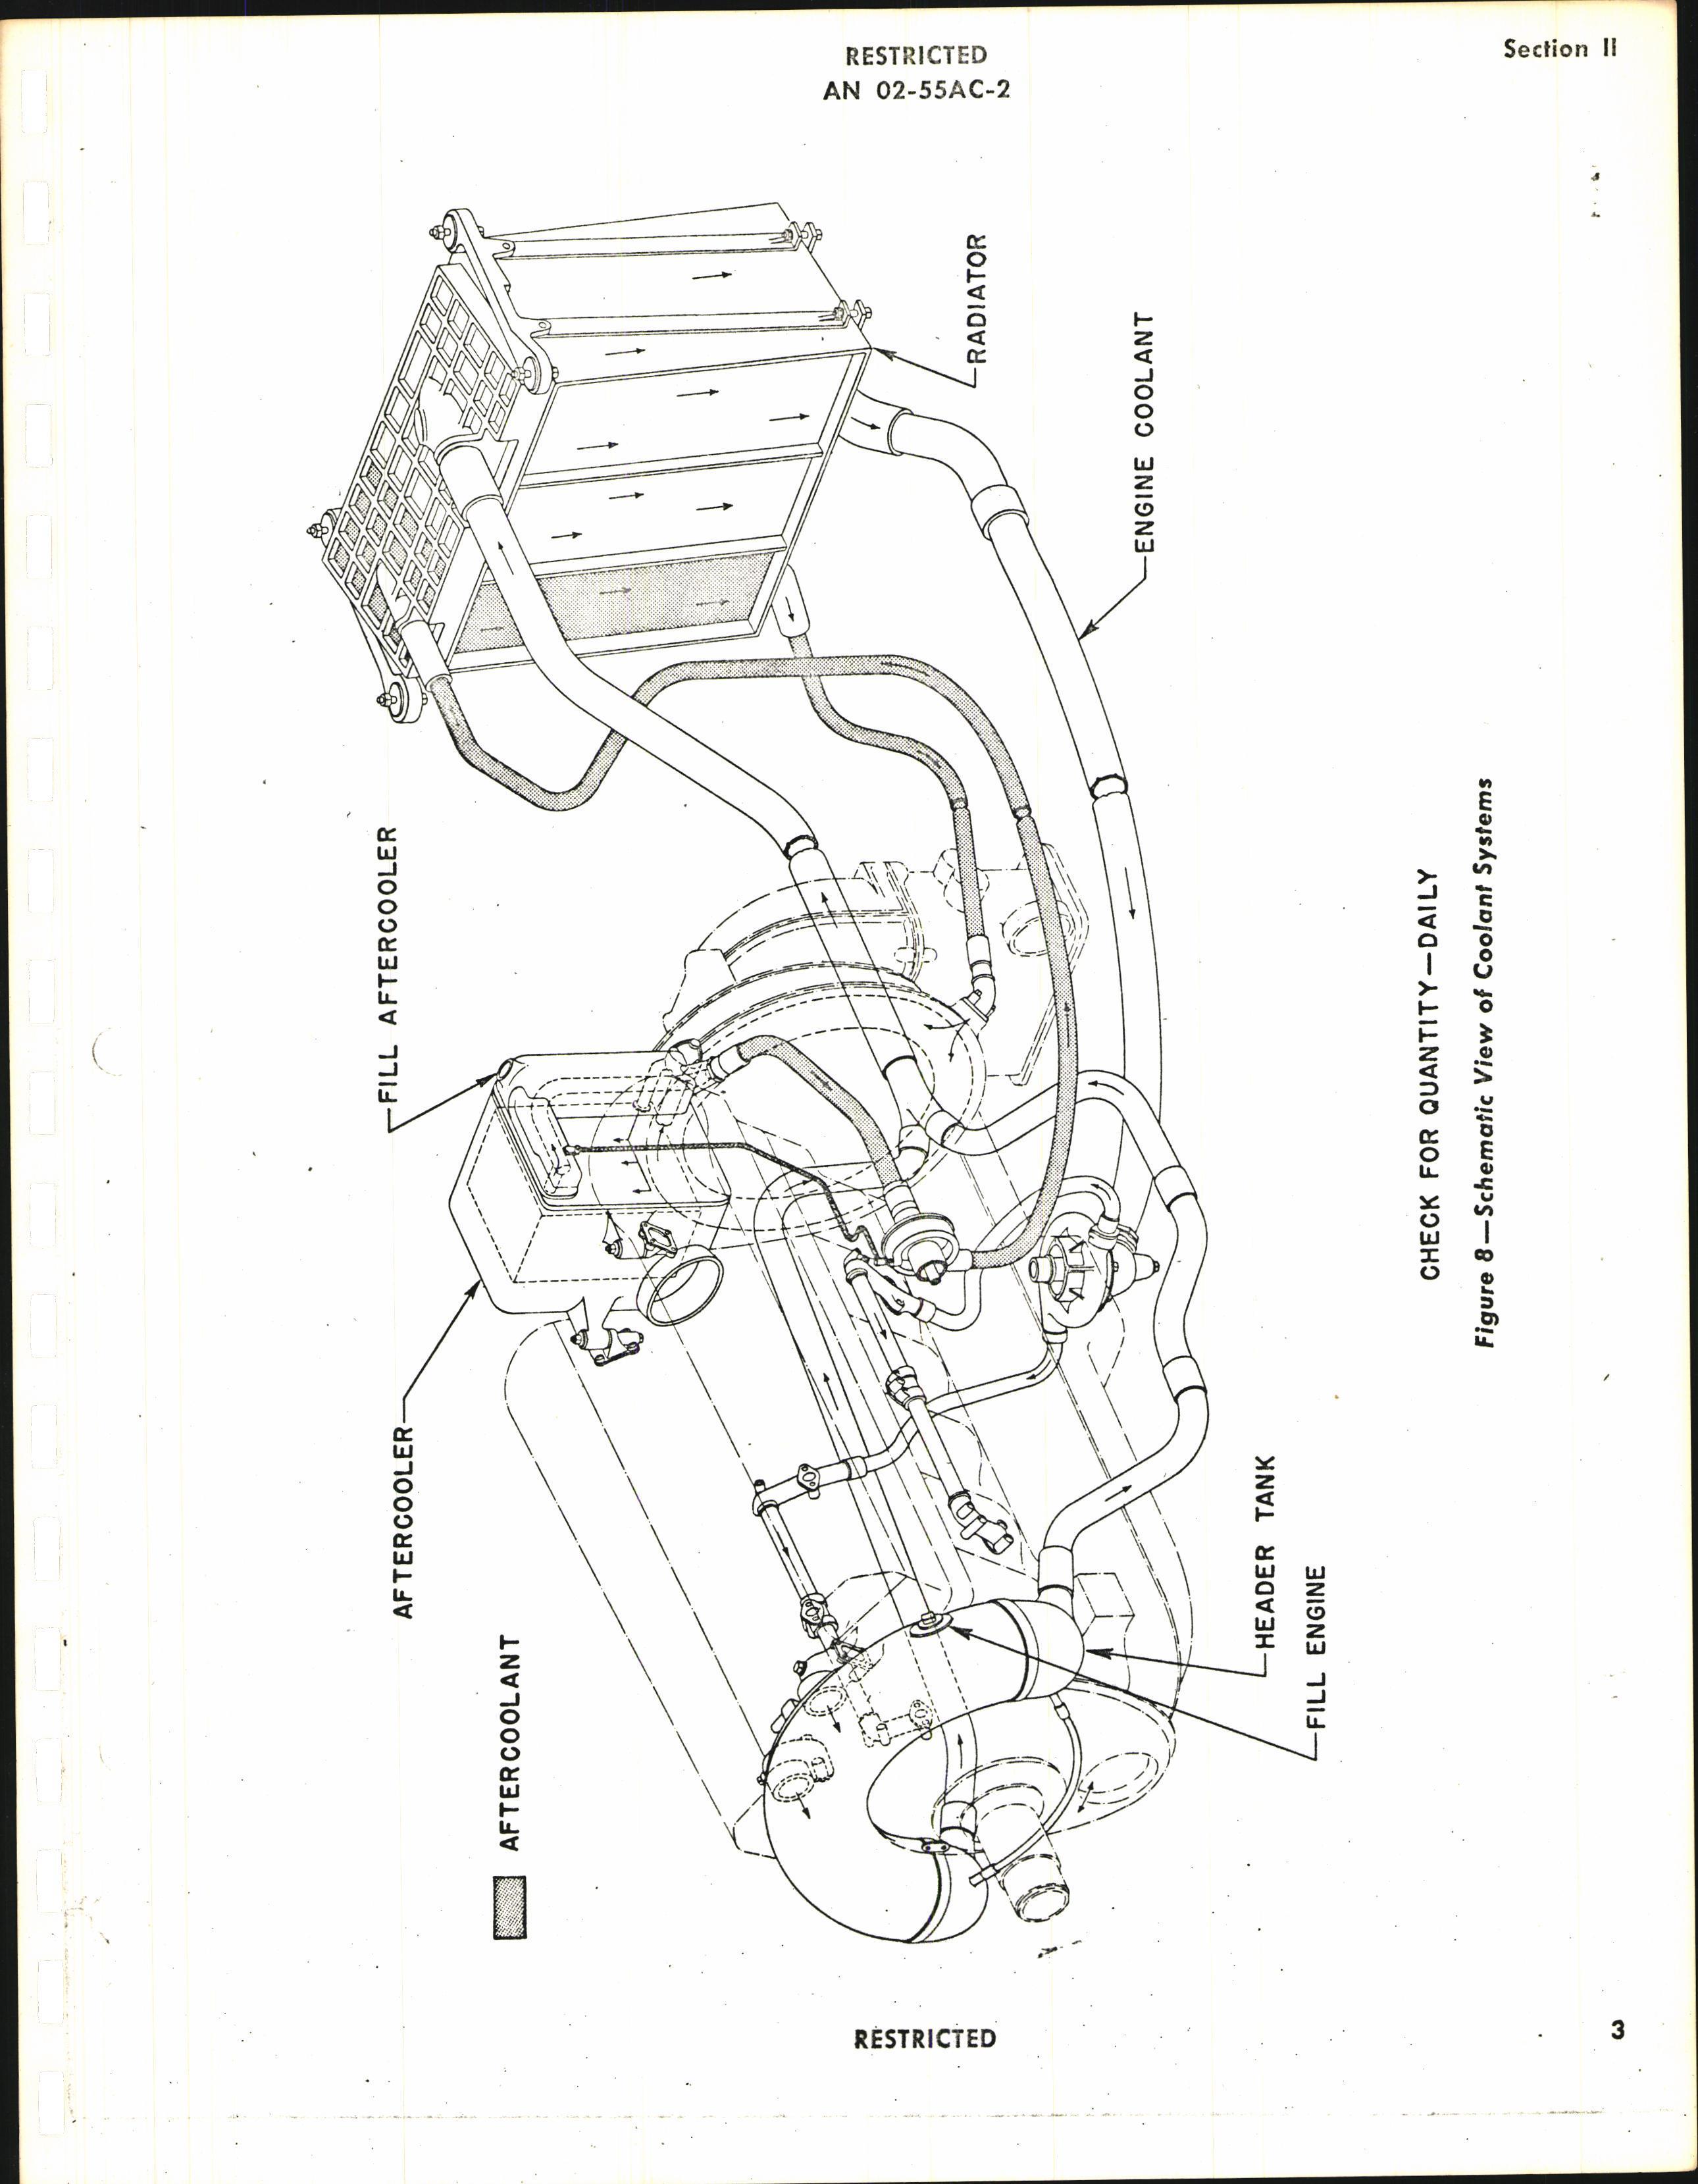 Sample page 17 from AirCorps Library document: Service Instructions for V-1650-3, -7, and Merlin 68 and 69 Engines